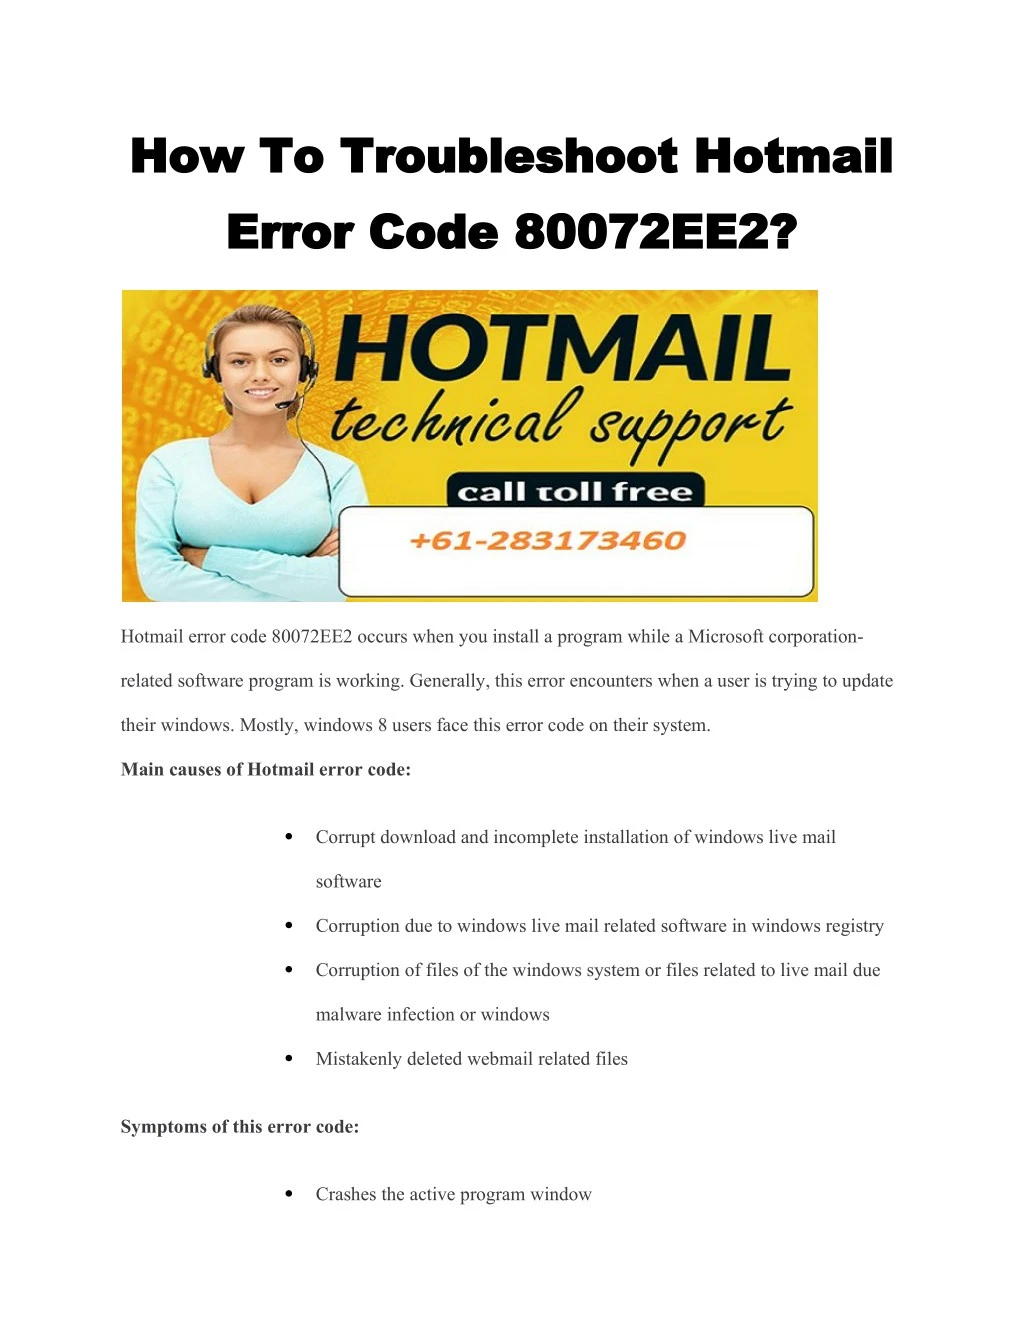 how to troubleshoot hotmail how to troubleshoot